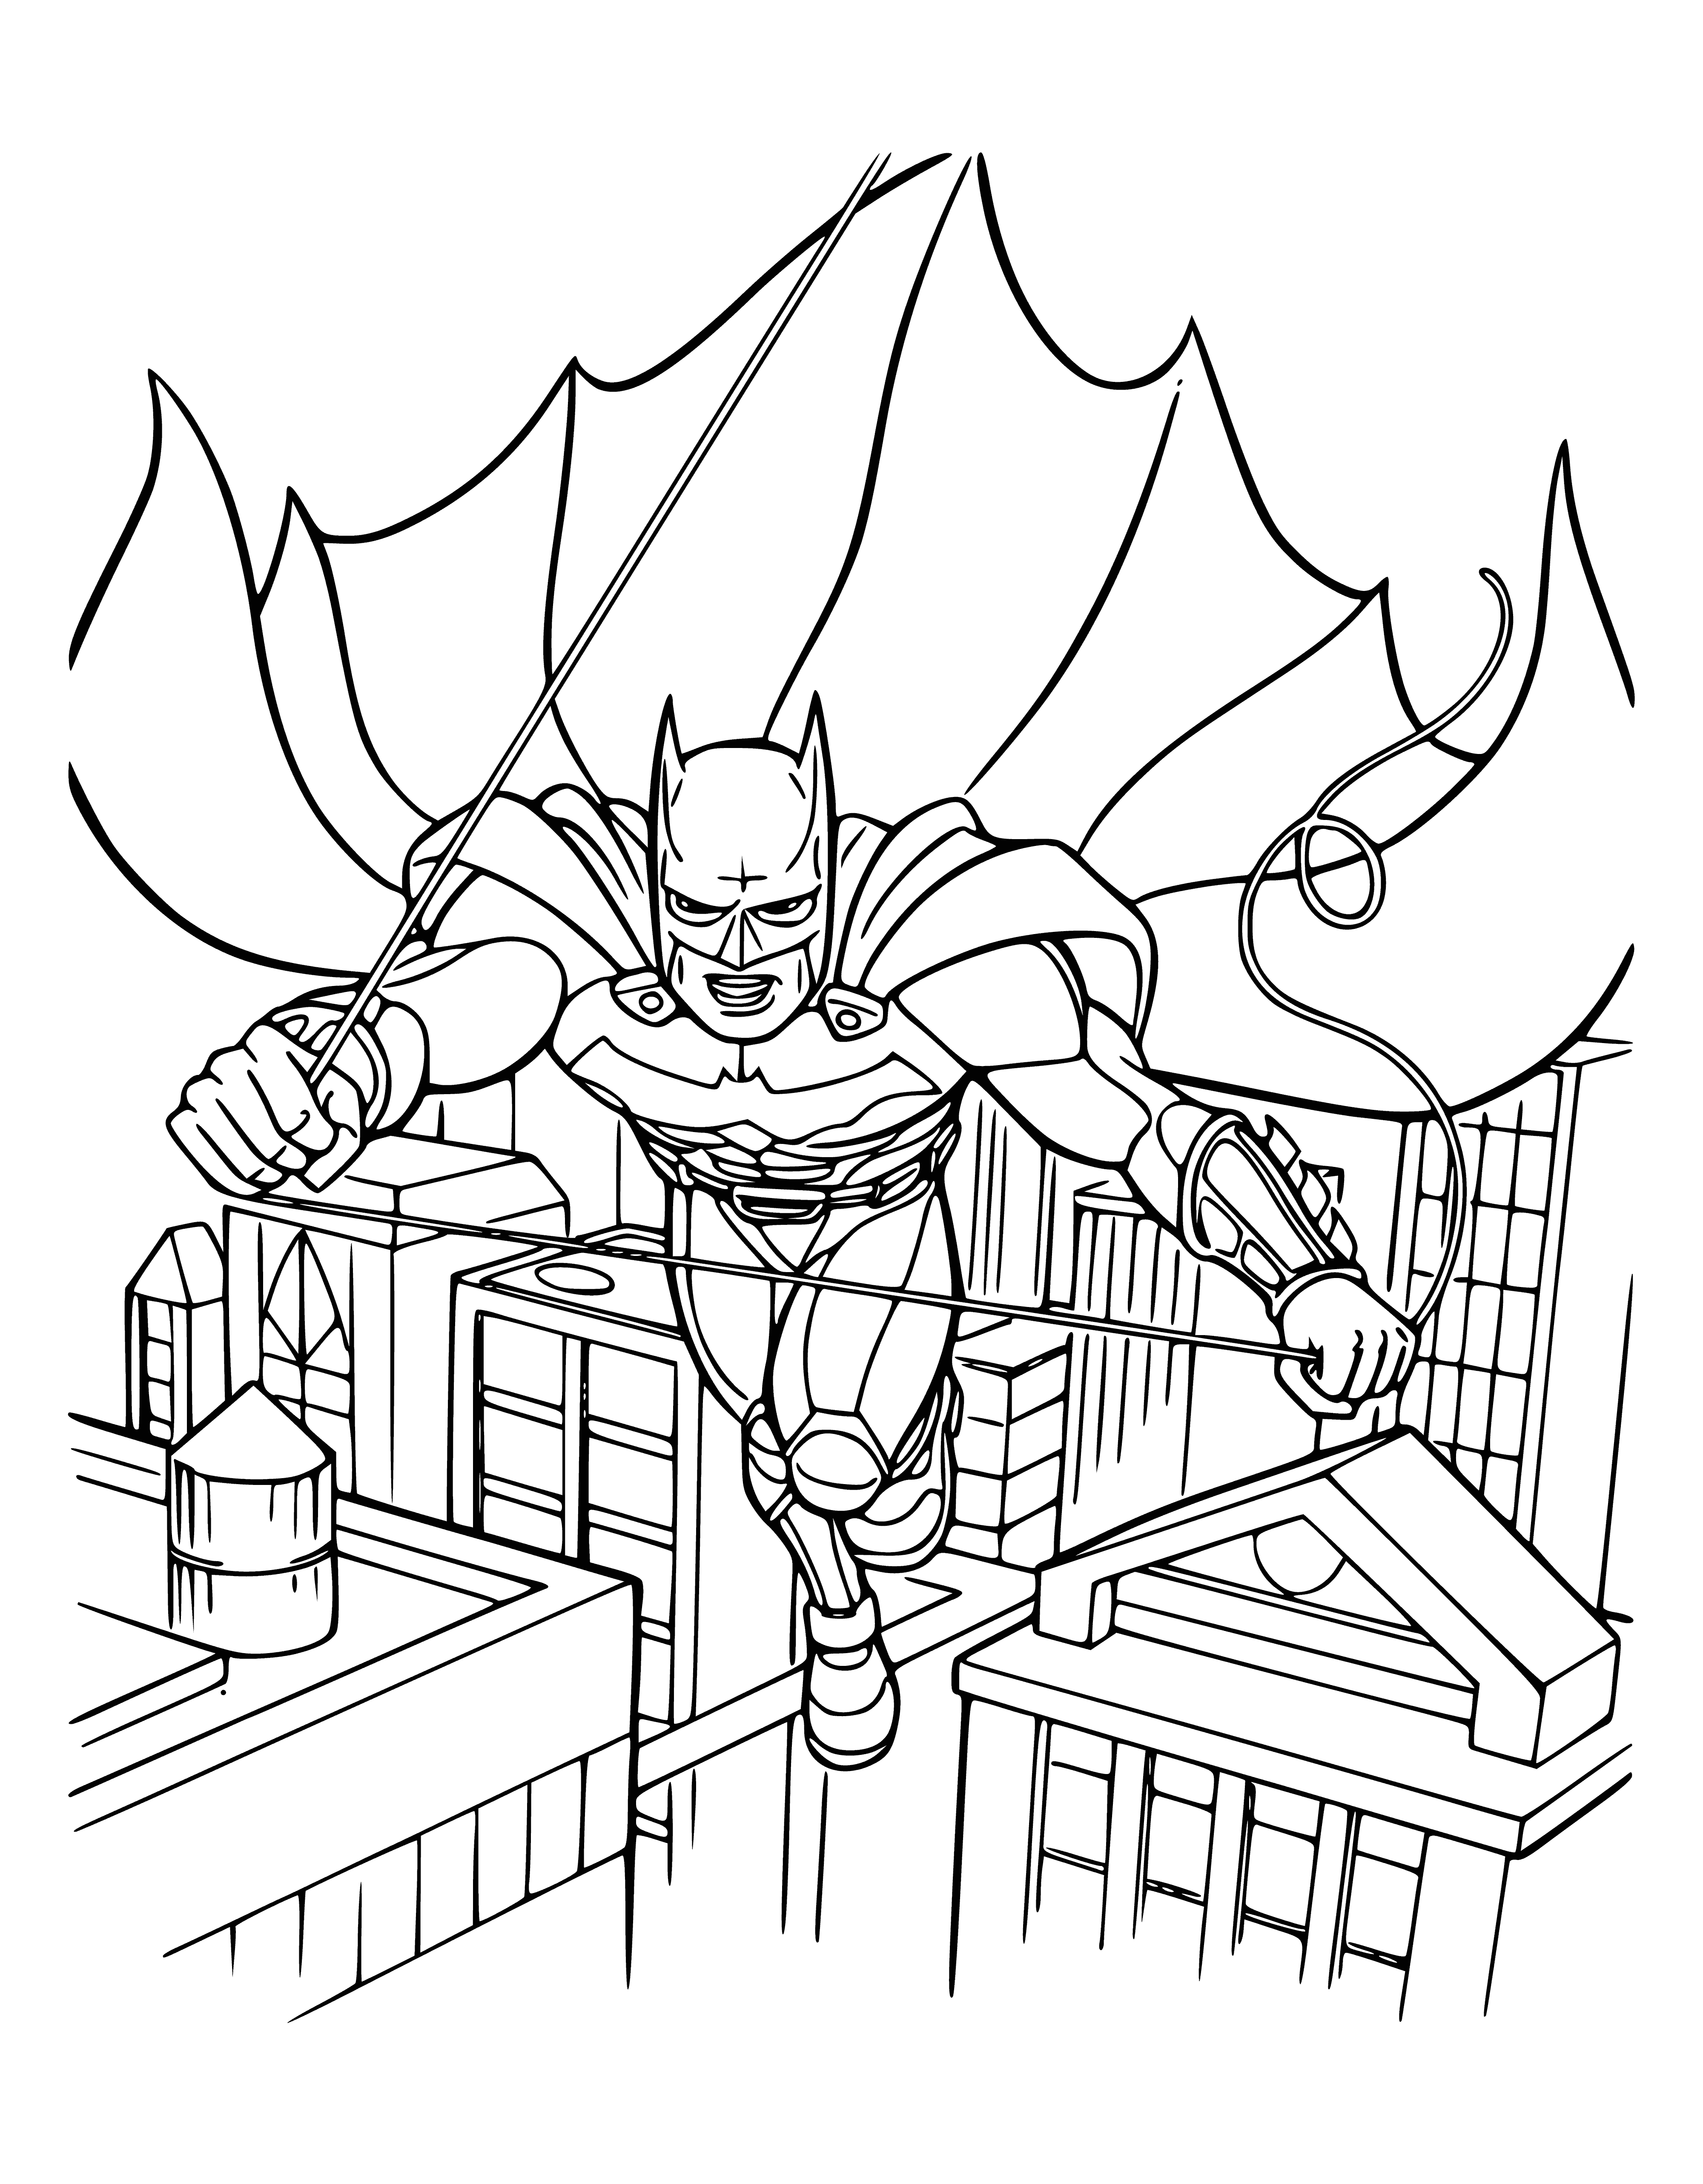 coloring page: Batman is a dark and determined superhero fighting crime in Gotham. He's one of the world's most popular heroes, appearing in comics, movies and TV shows.